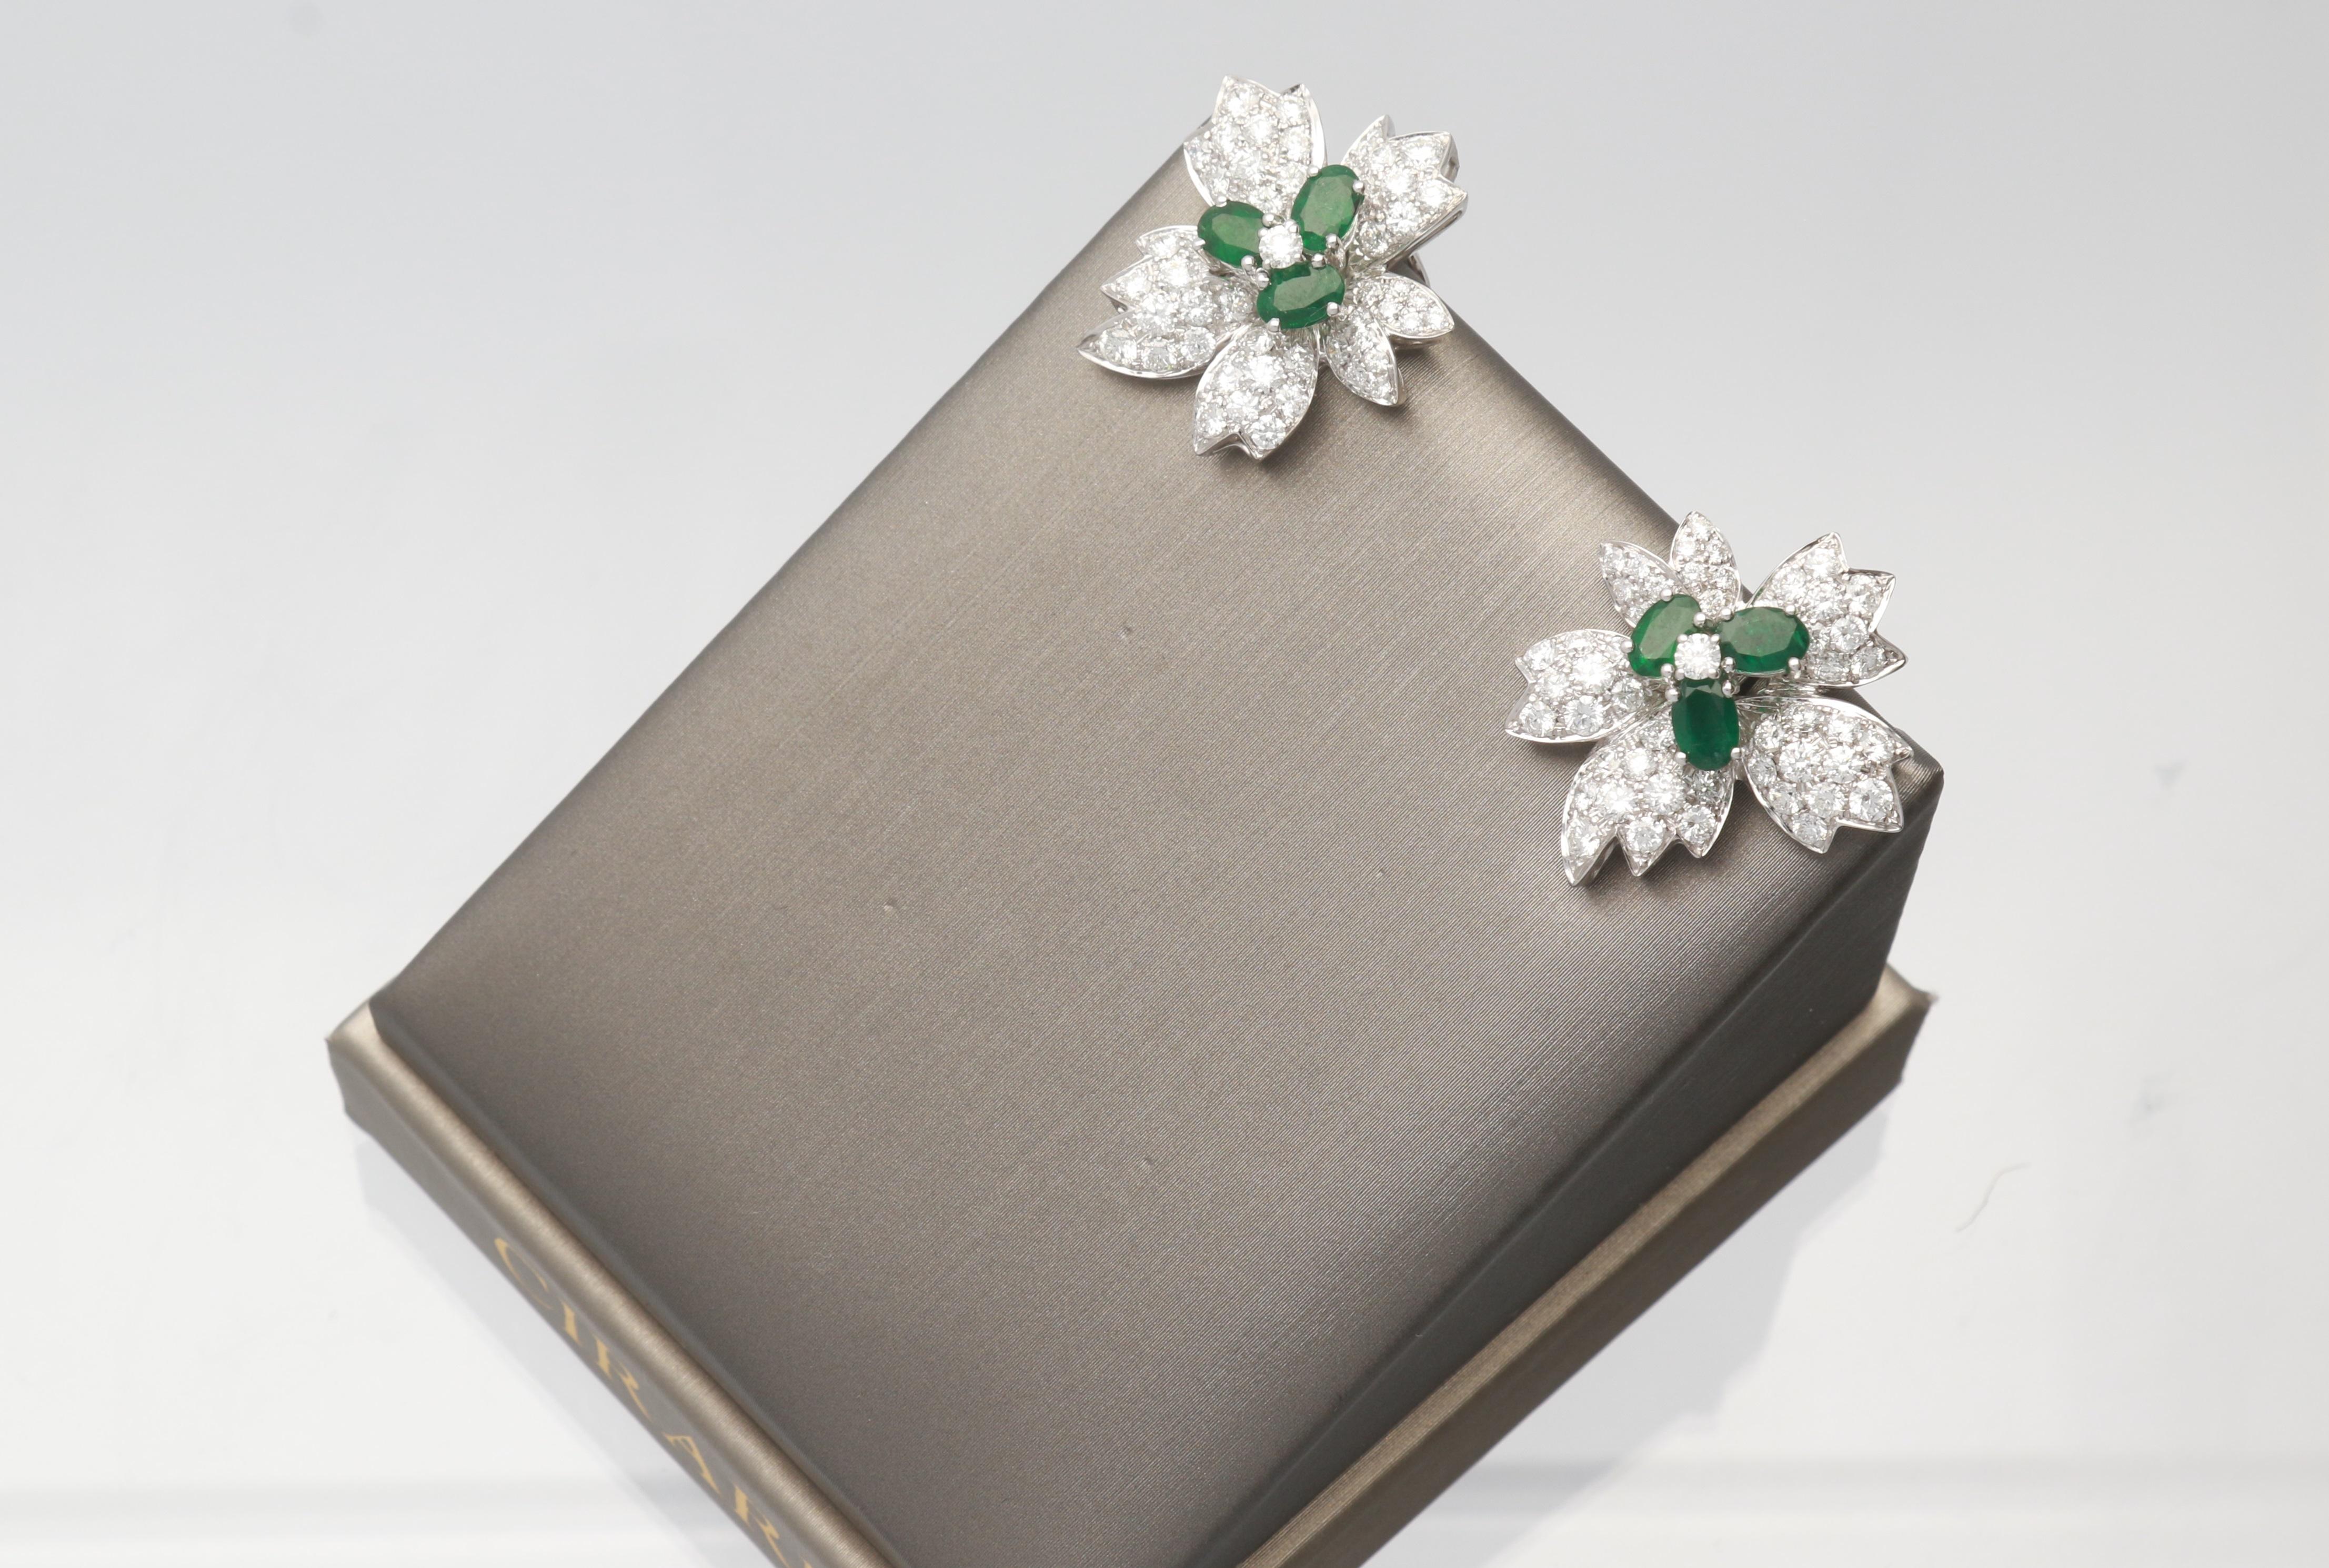 This one of a kind Earring is crafted in 18-karat White Gold and features six oval cut Emeralds 2 9/10 Carat, 2 Brilliant cut Round Diamonds 0.18 carat & 100 Brilliant cut Round Diamonds 4 1/8 Carat. This earring is secured with omega backs and it